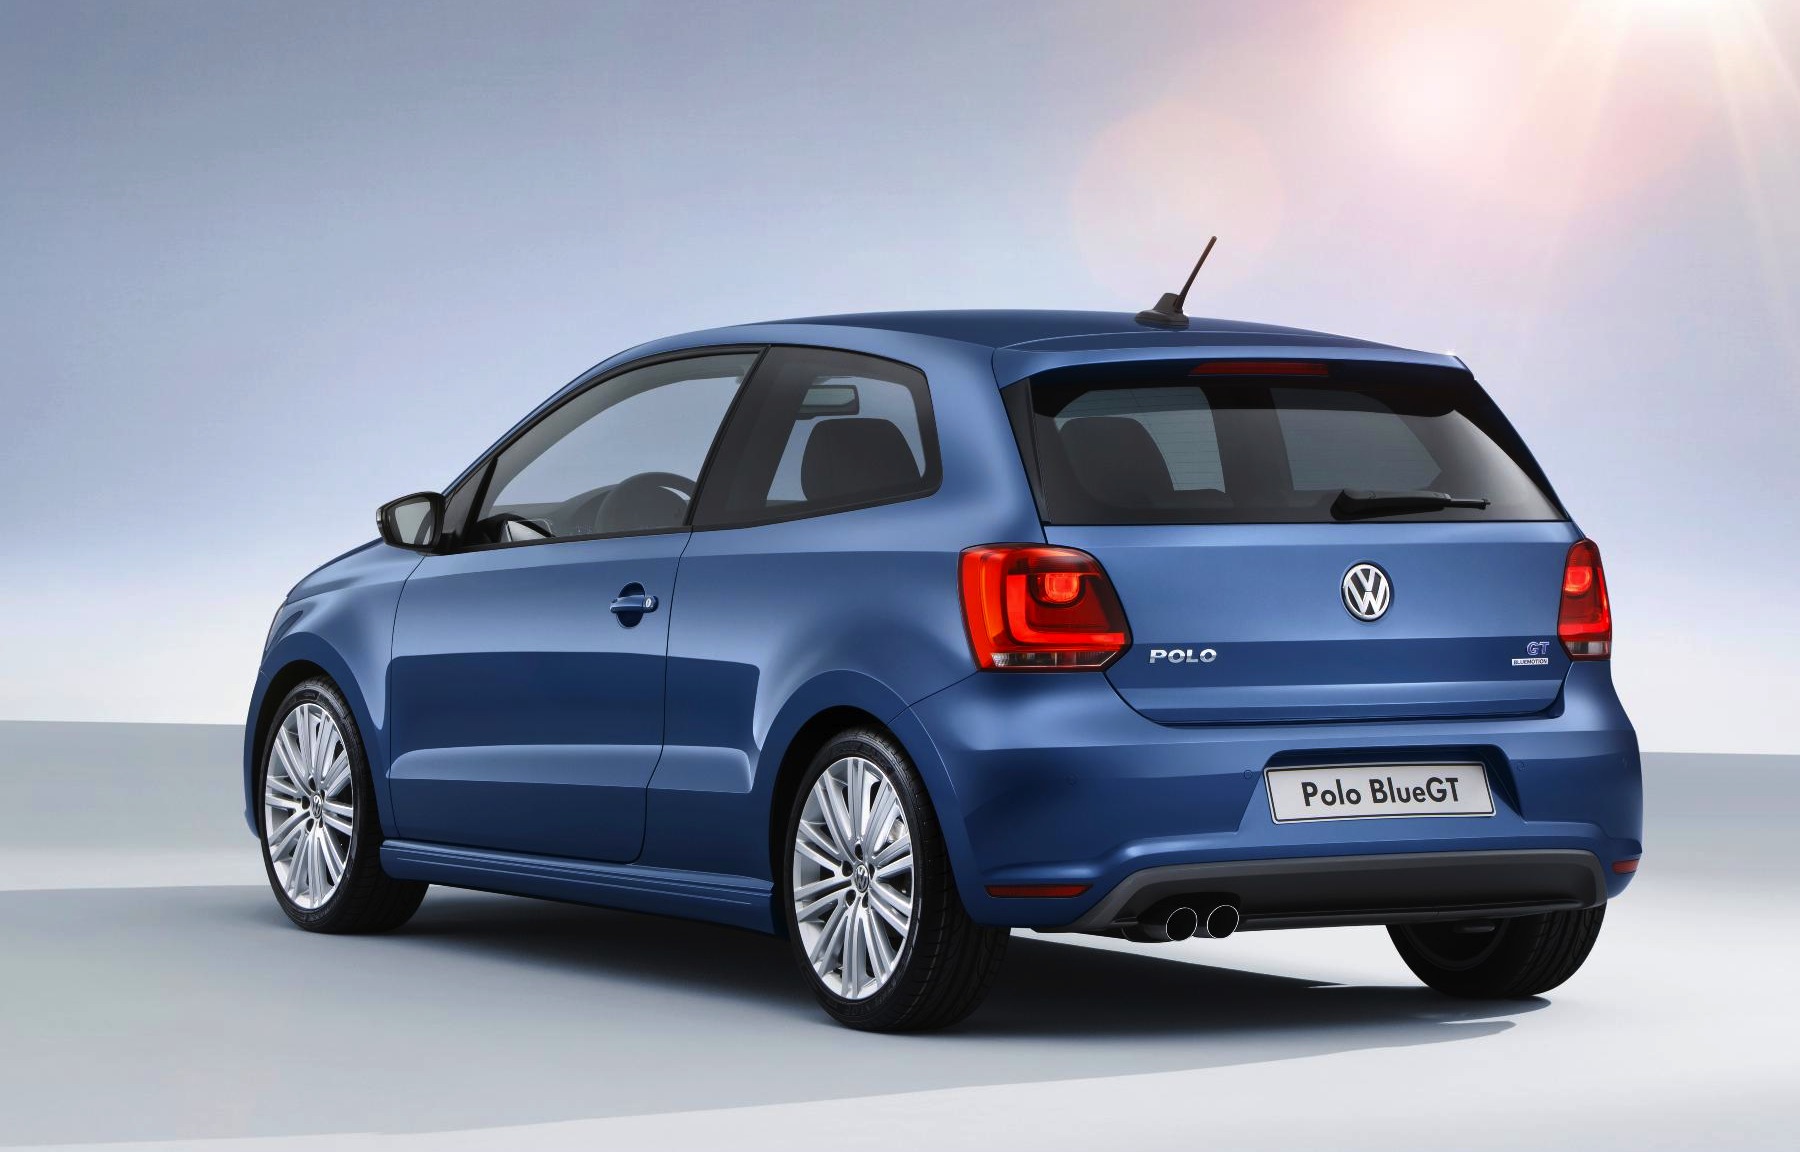 Volkswagen Polo BlueGT runs on two cylinders